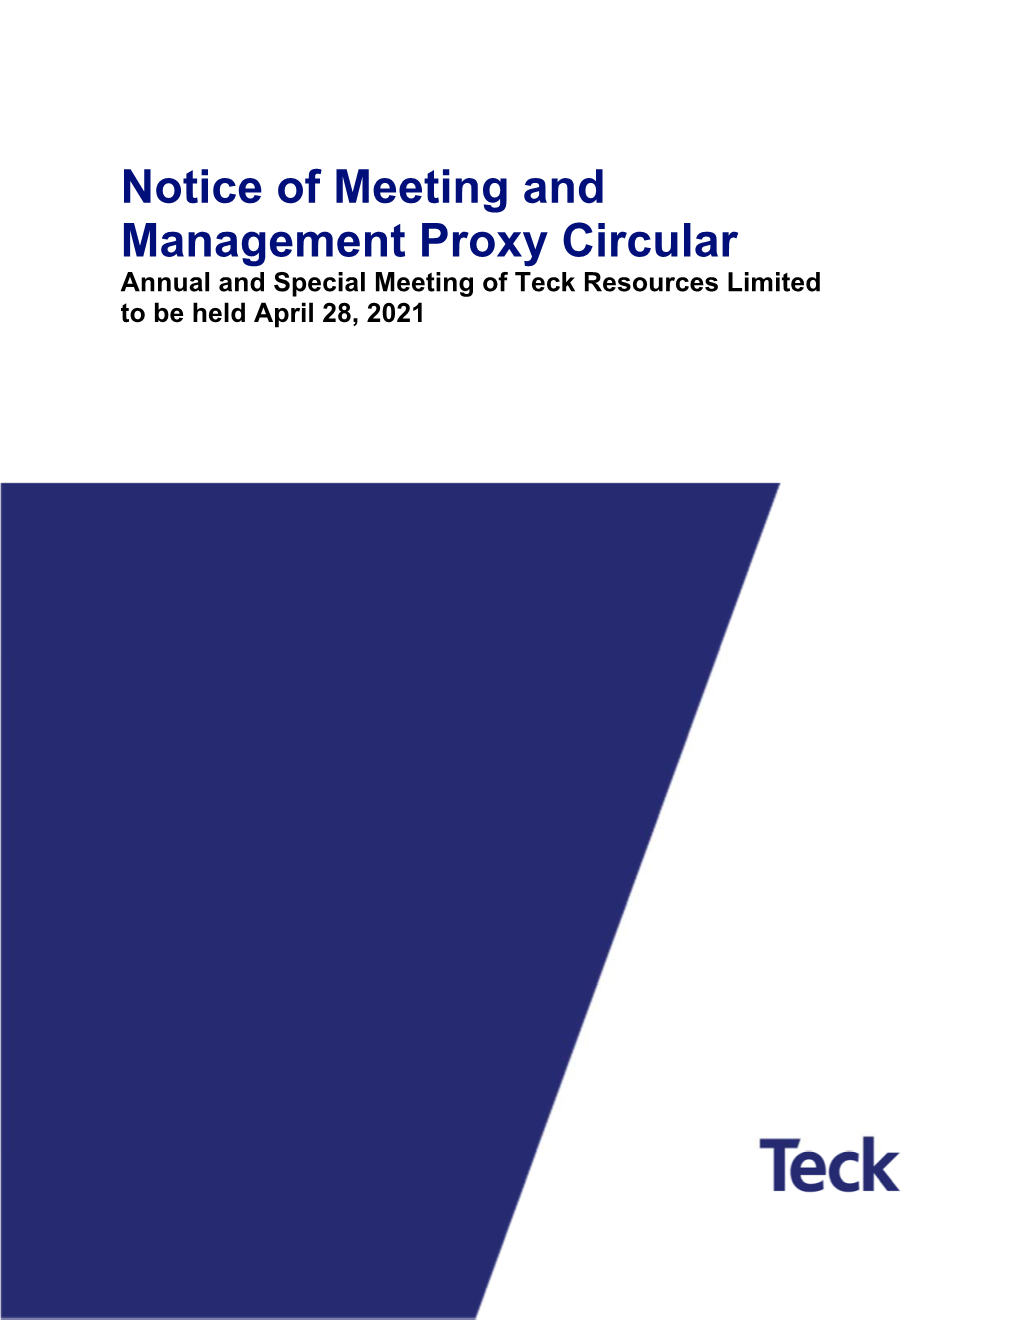 Notice of Meeting and Management Proxy Circular Annual and Special Meeting of Teck Resources Limited to Be Held April 28, 2021